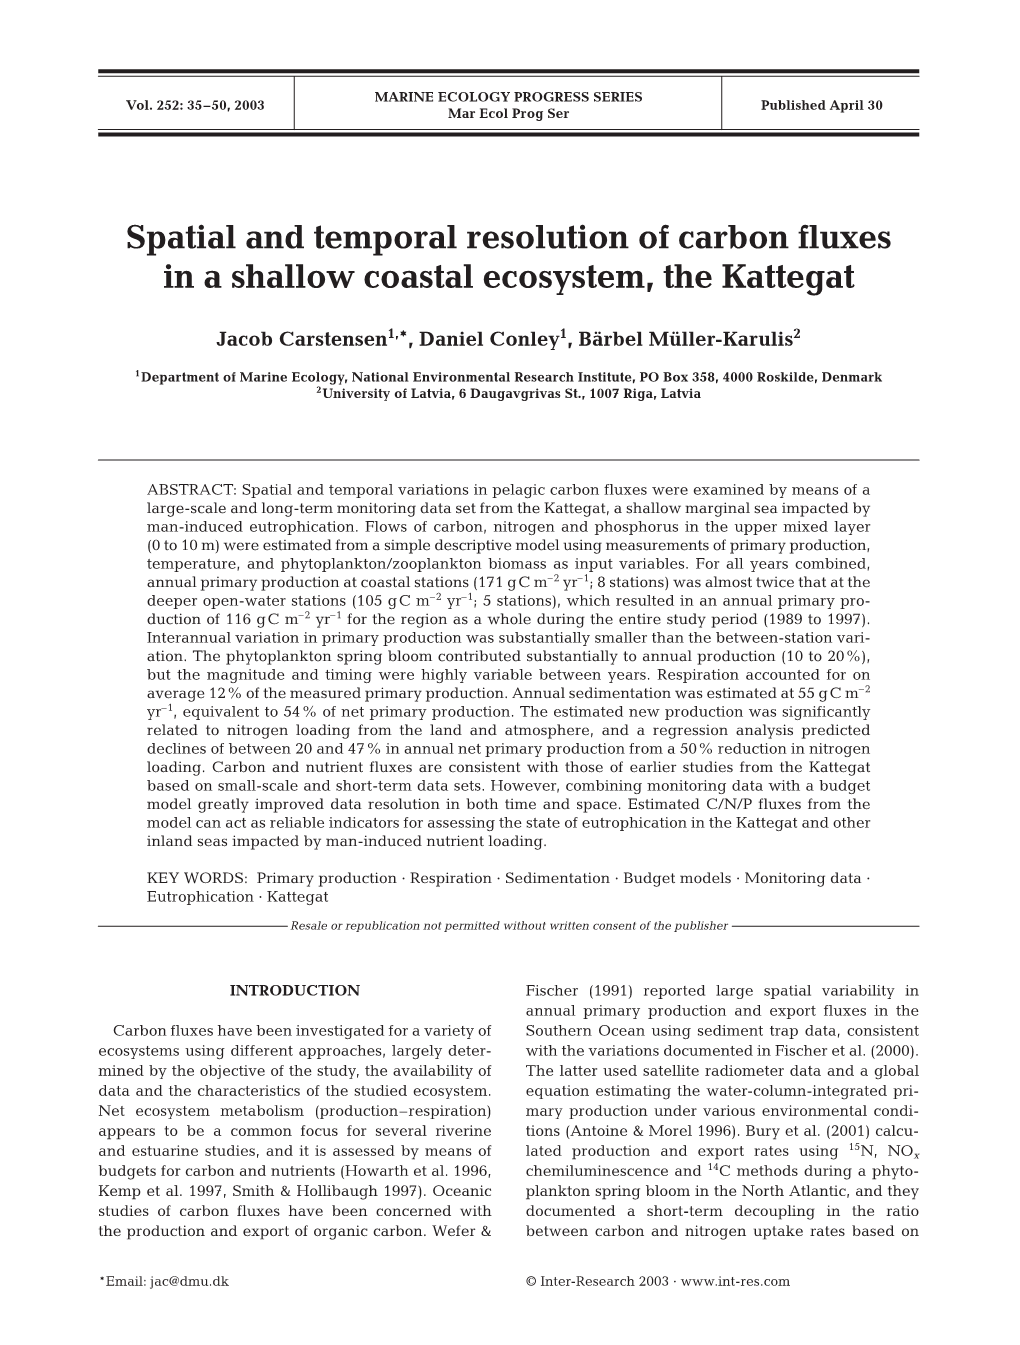 Spatial and Temporal Resolution of Carbon Fluxes in a Shallow Coastal Ecosystem, the Kattegat